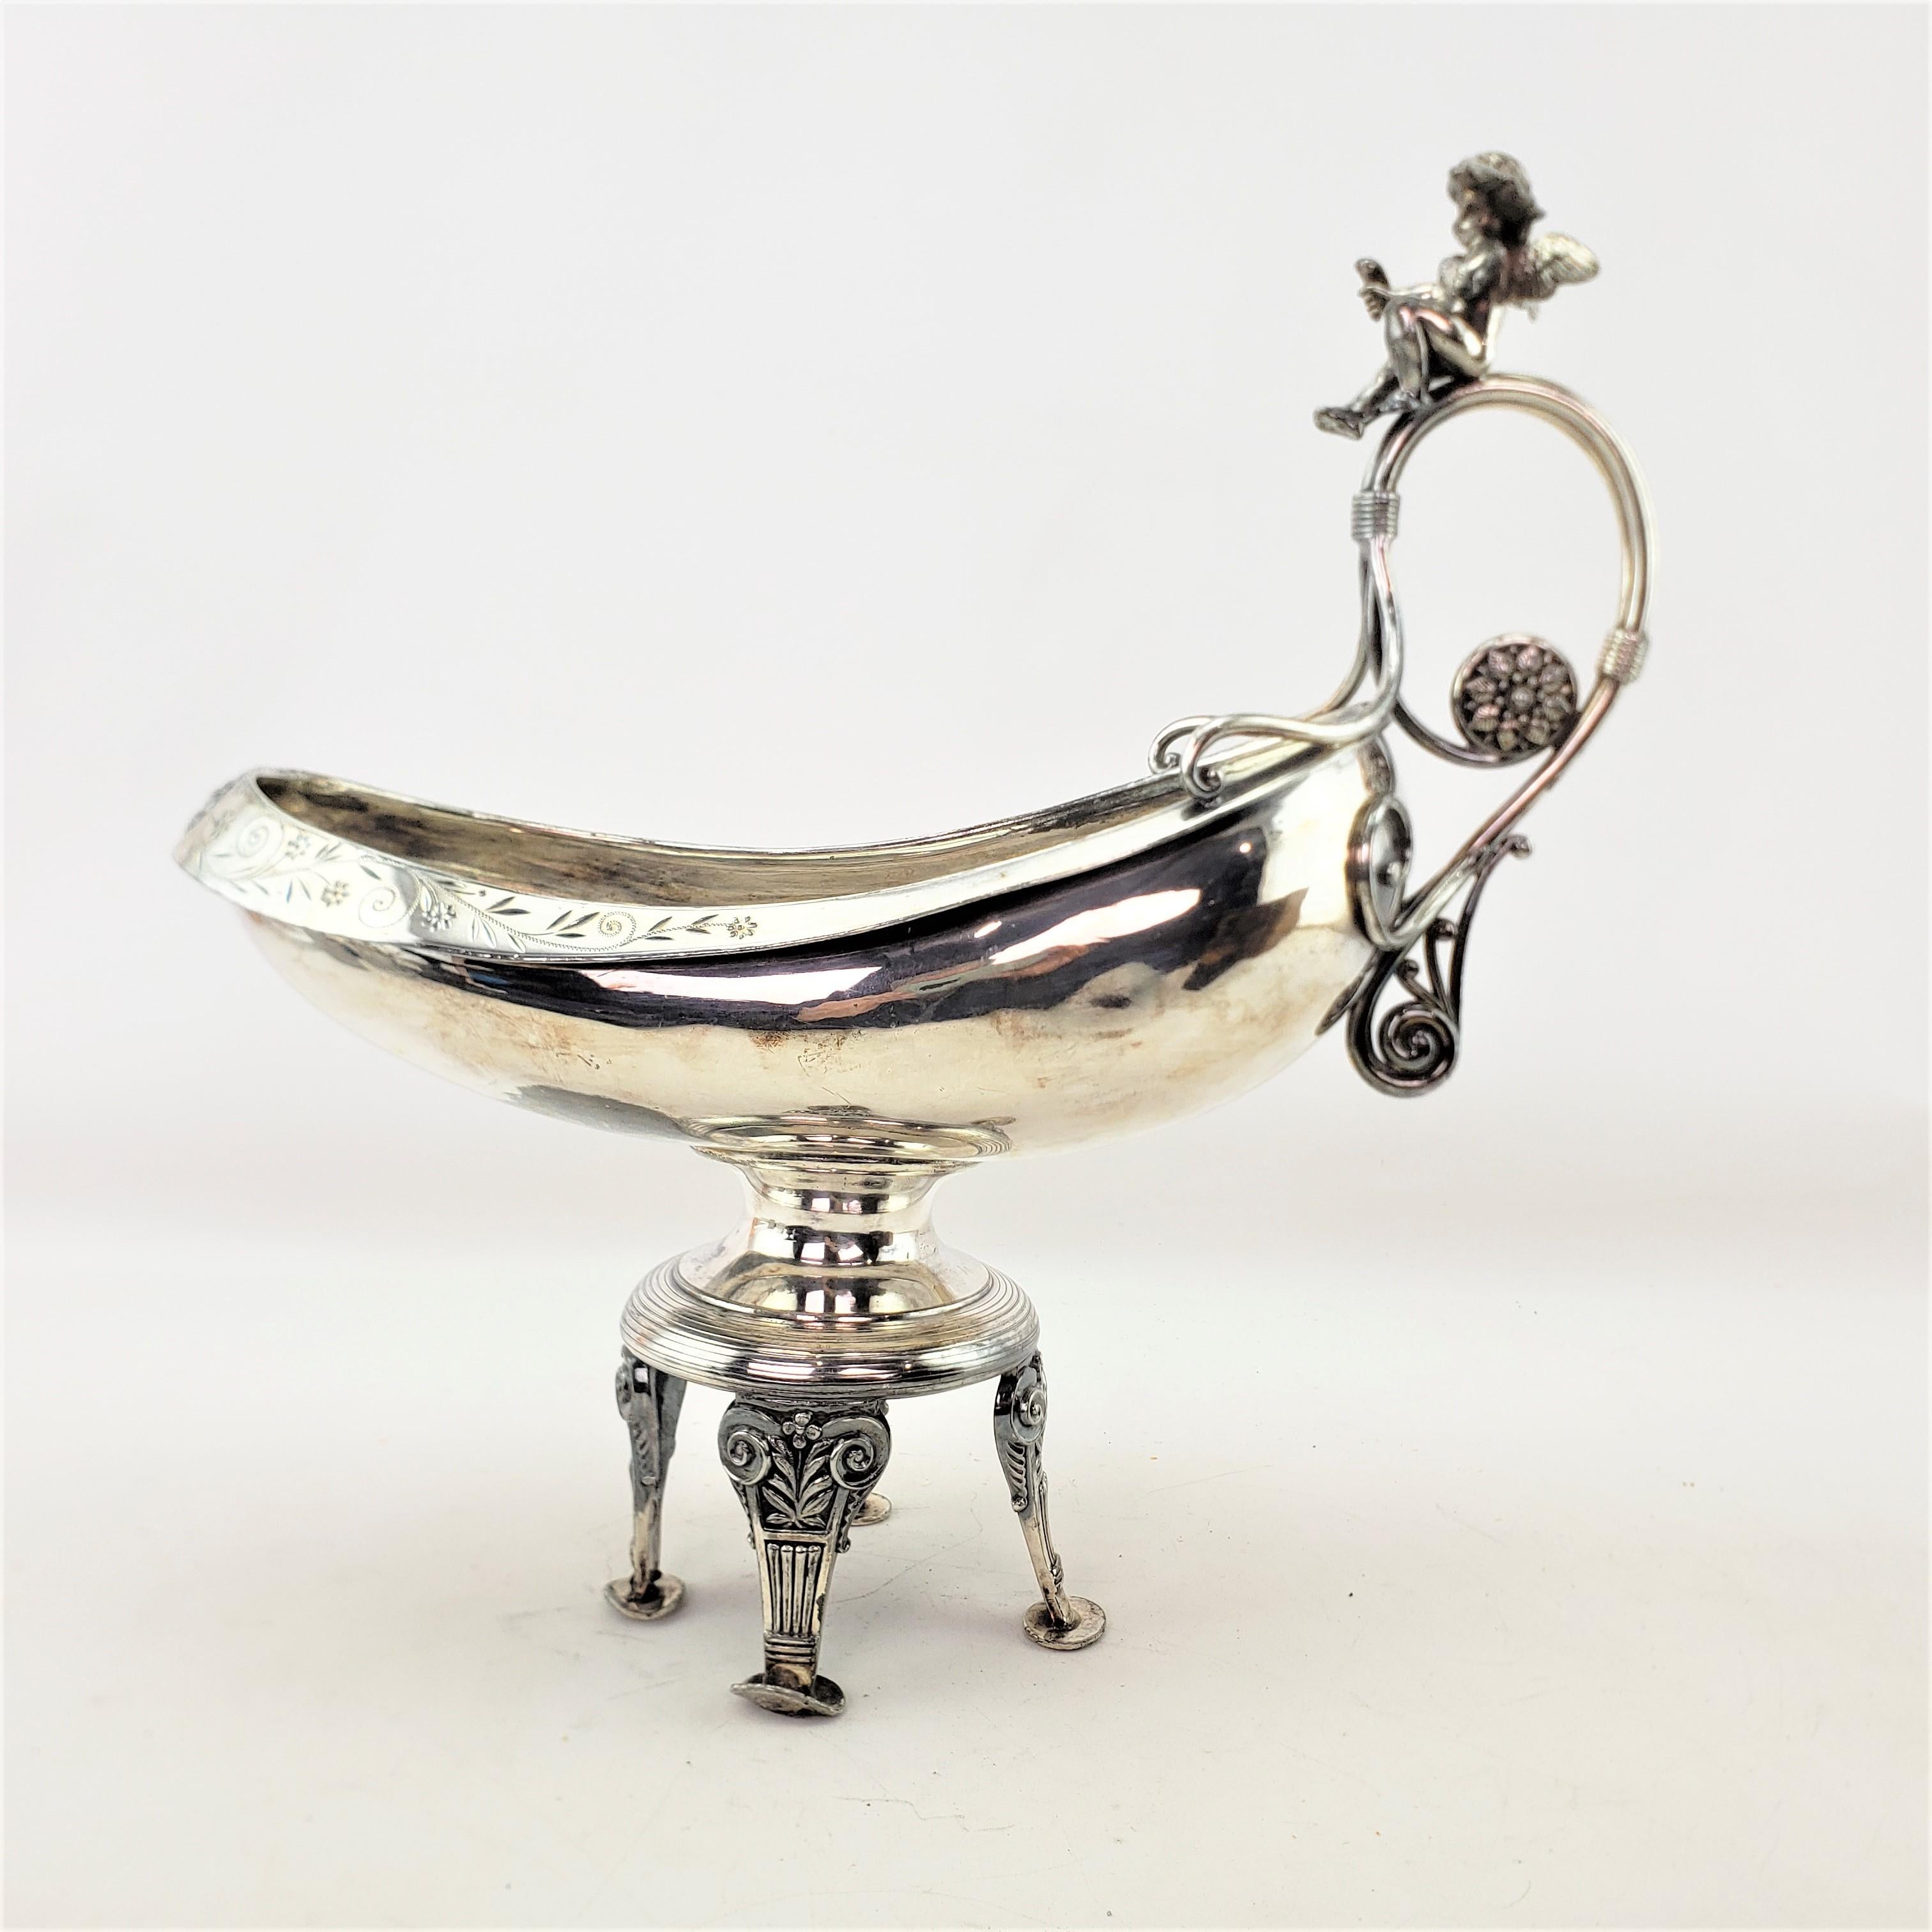 This antique centerpiece pedestal bowl is signed by an unidentified maker, but believed to have originated from the United States and date to approximately 1900 and done in a Victorian style. The centerpiece is composed of silver plate and features